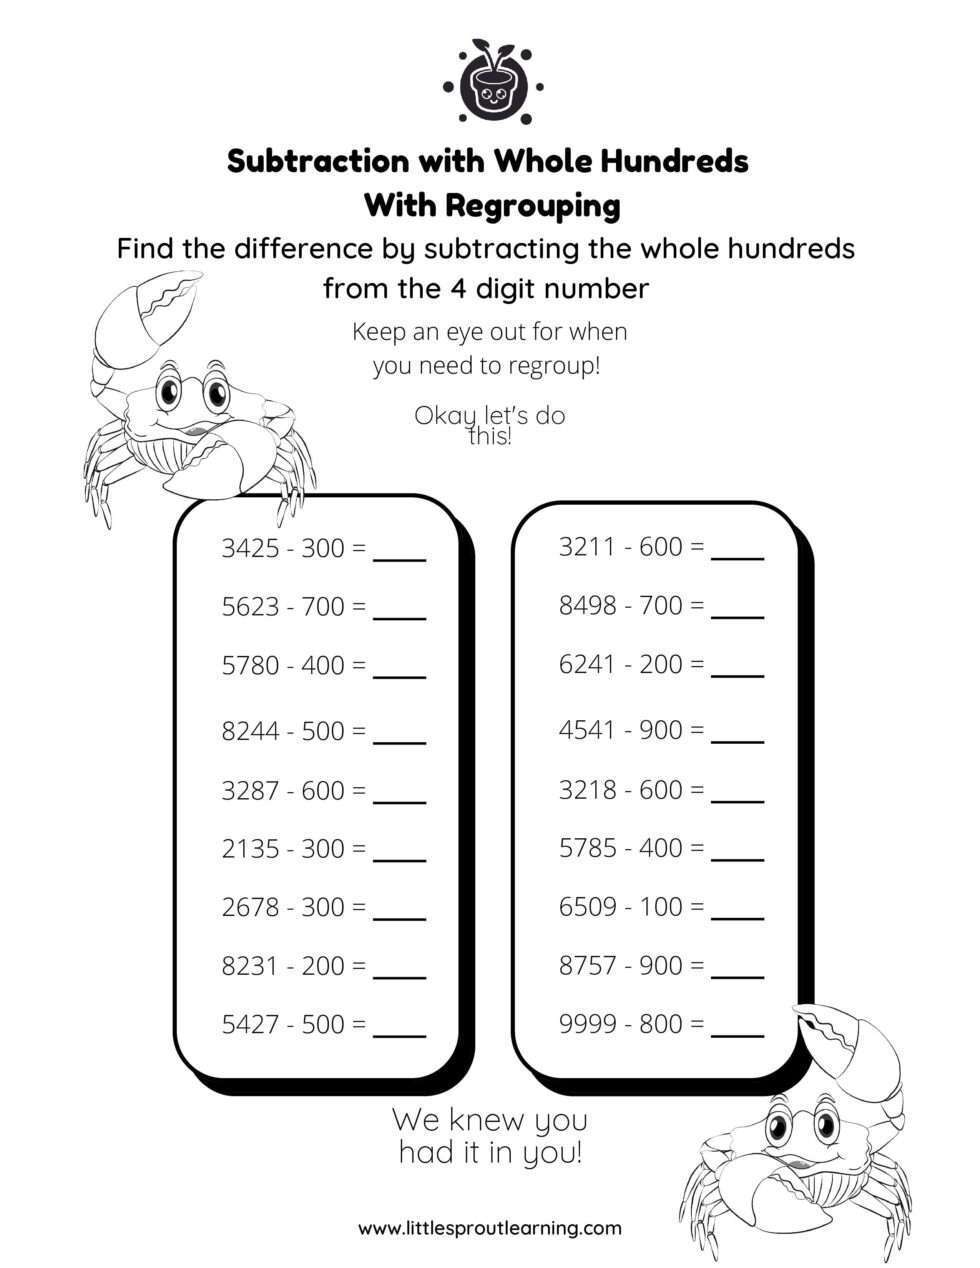 grade-3-subtraction-worksheet-subtraction-with-whole-hundreds-from-4-digit-numbers-with